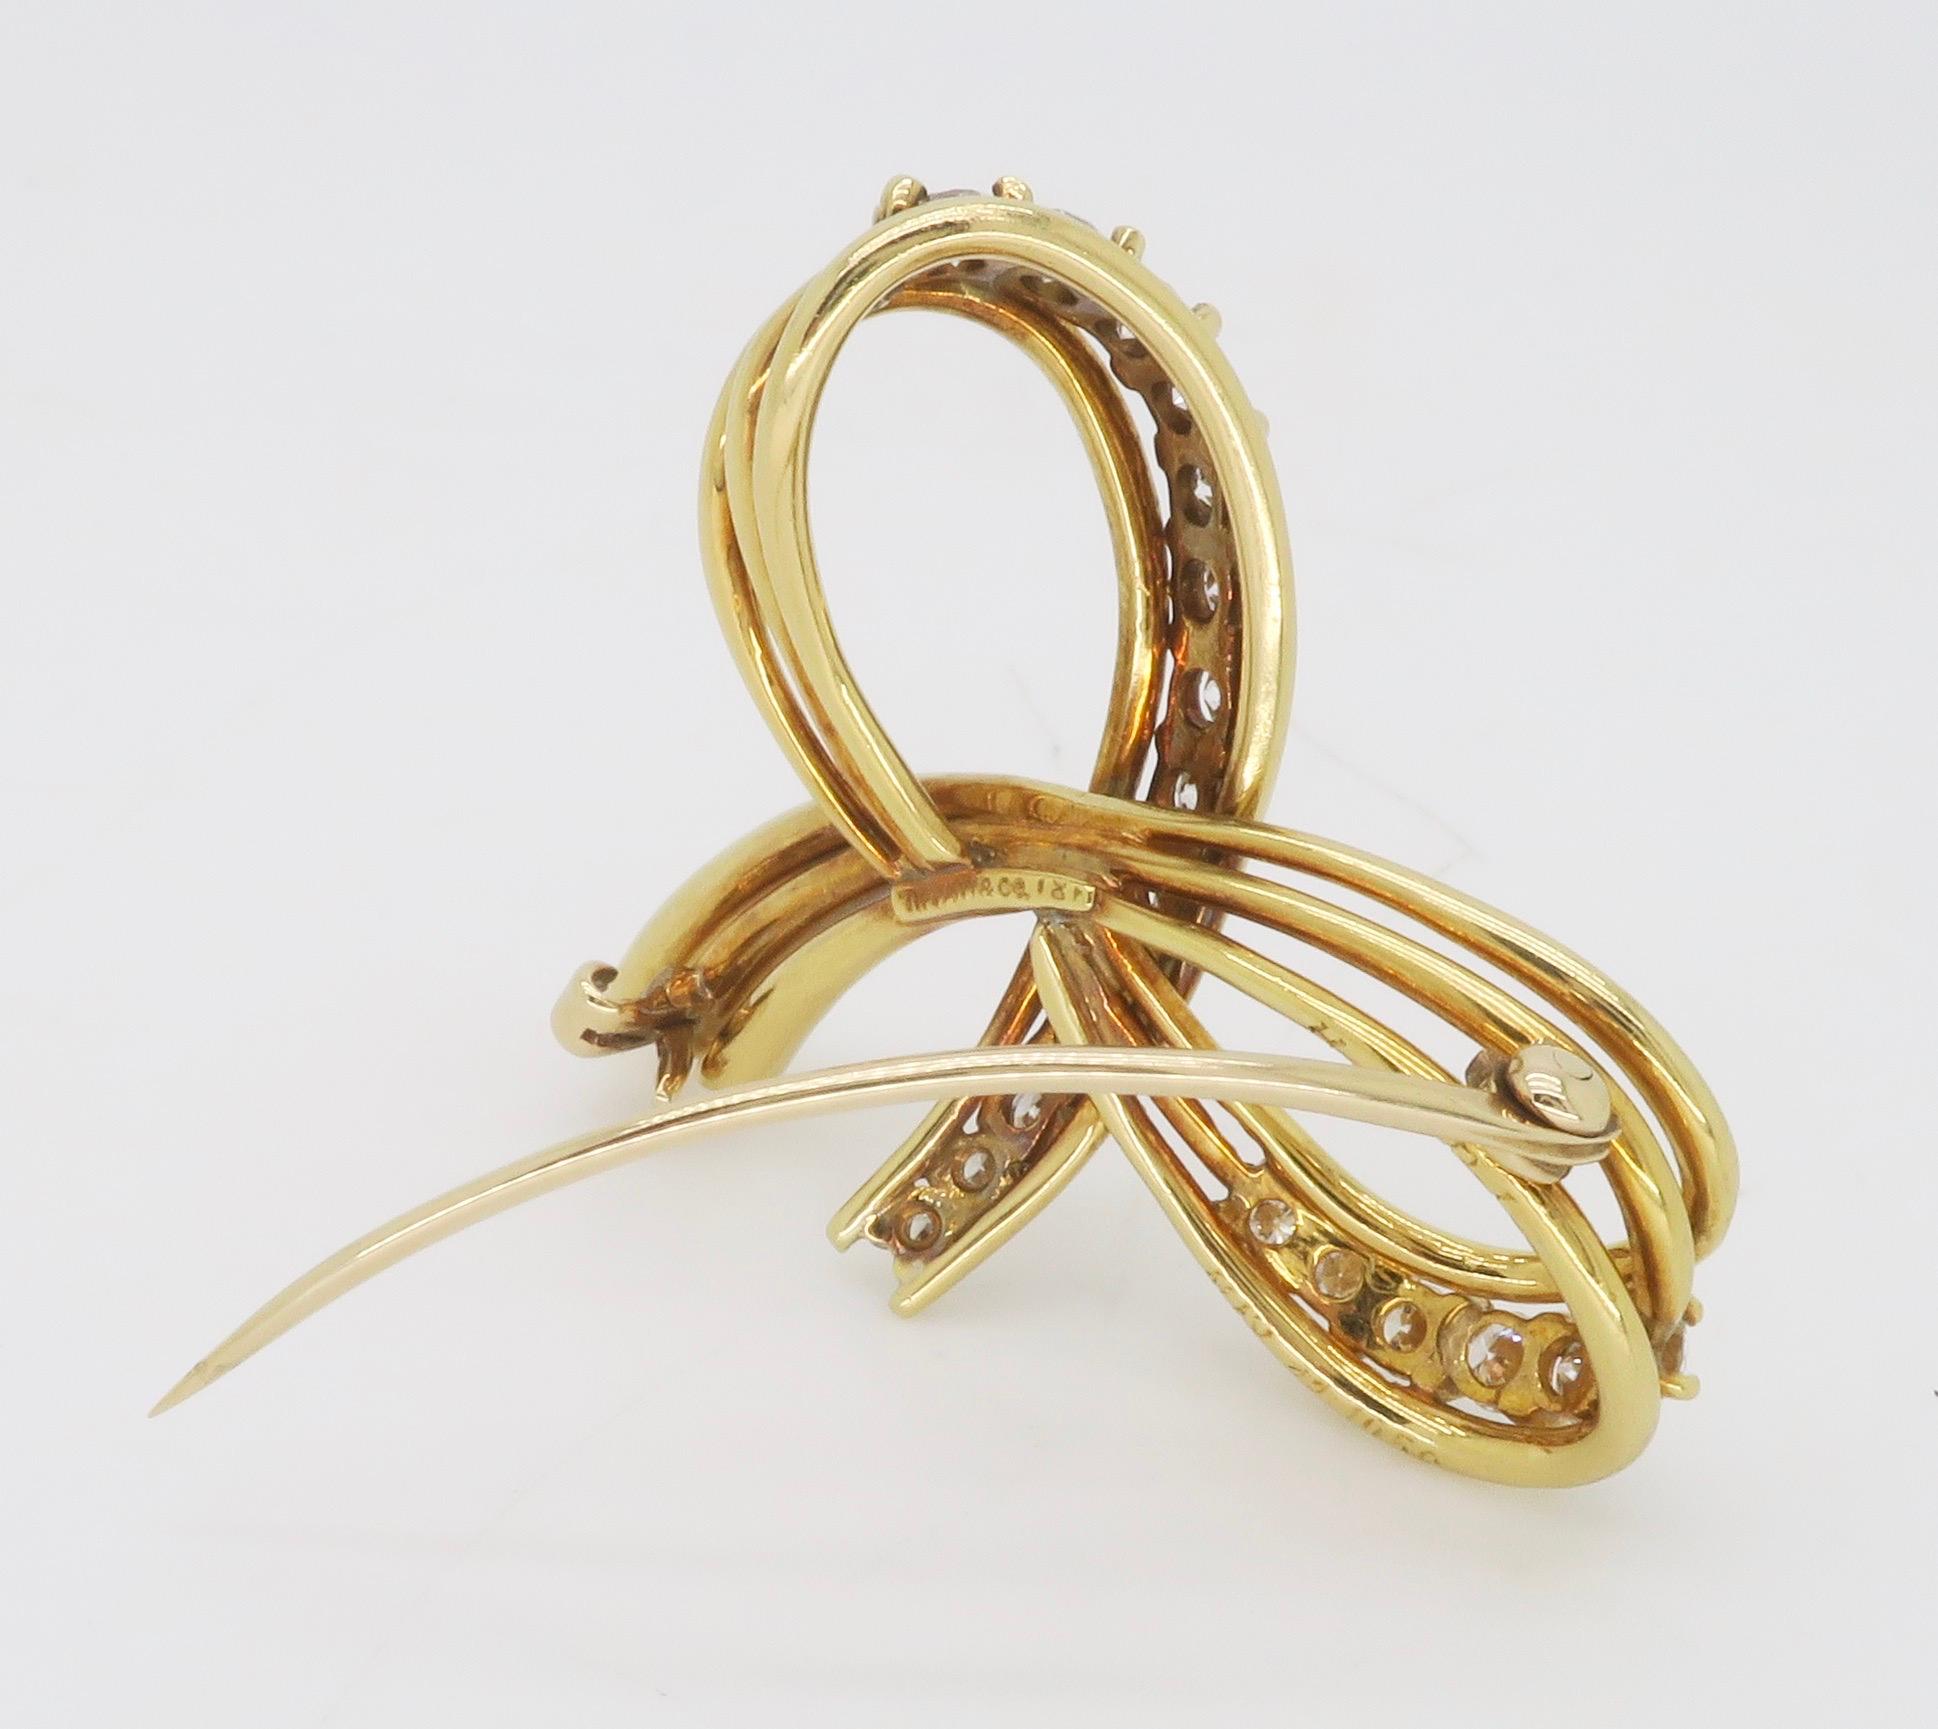 Vintage Tiffany & Co. Diamond Bow Brooch in 18k Yellow Gold  4